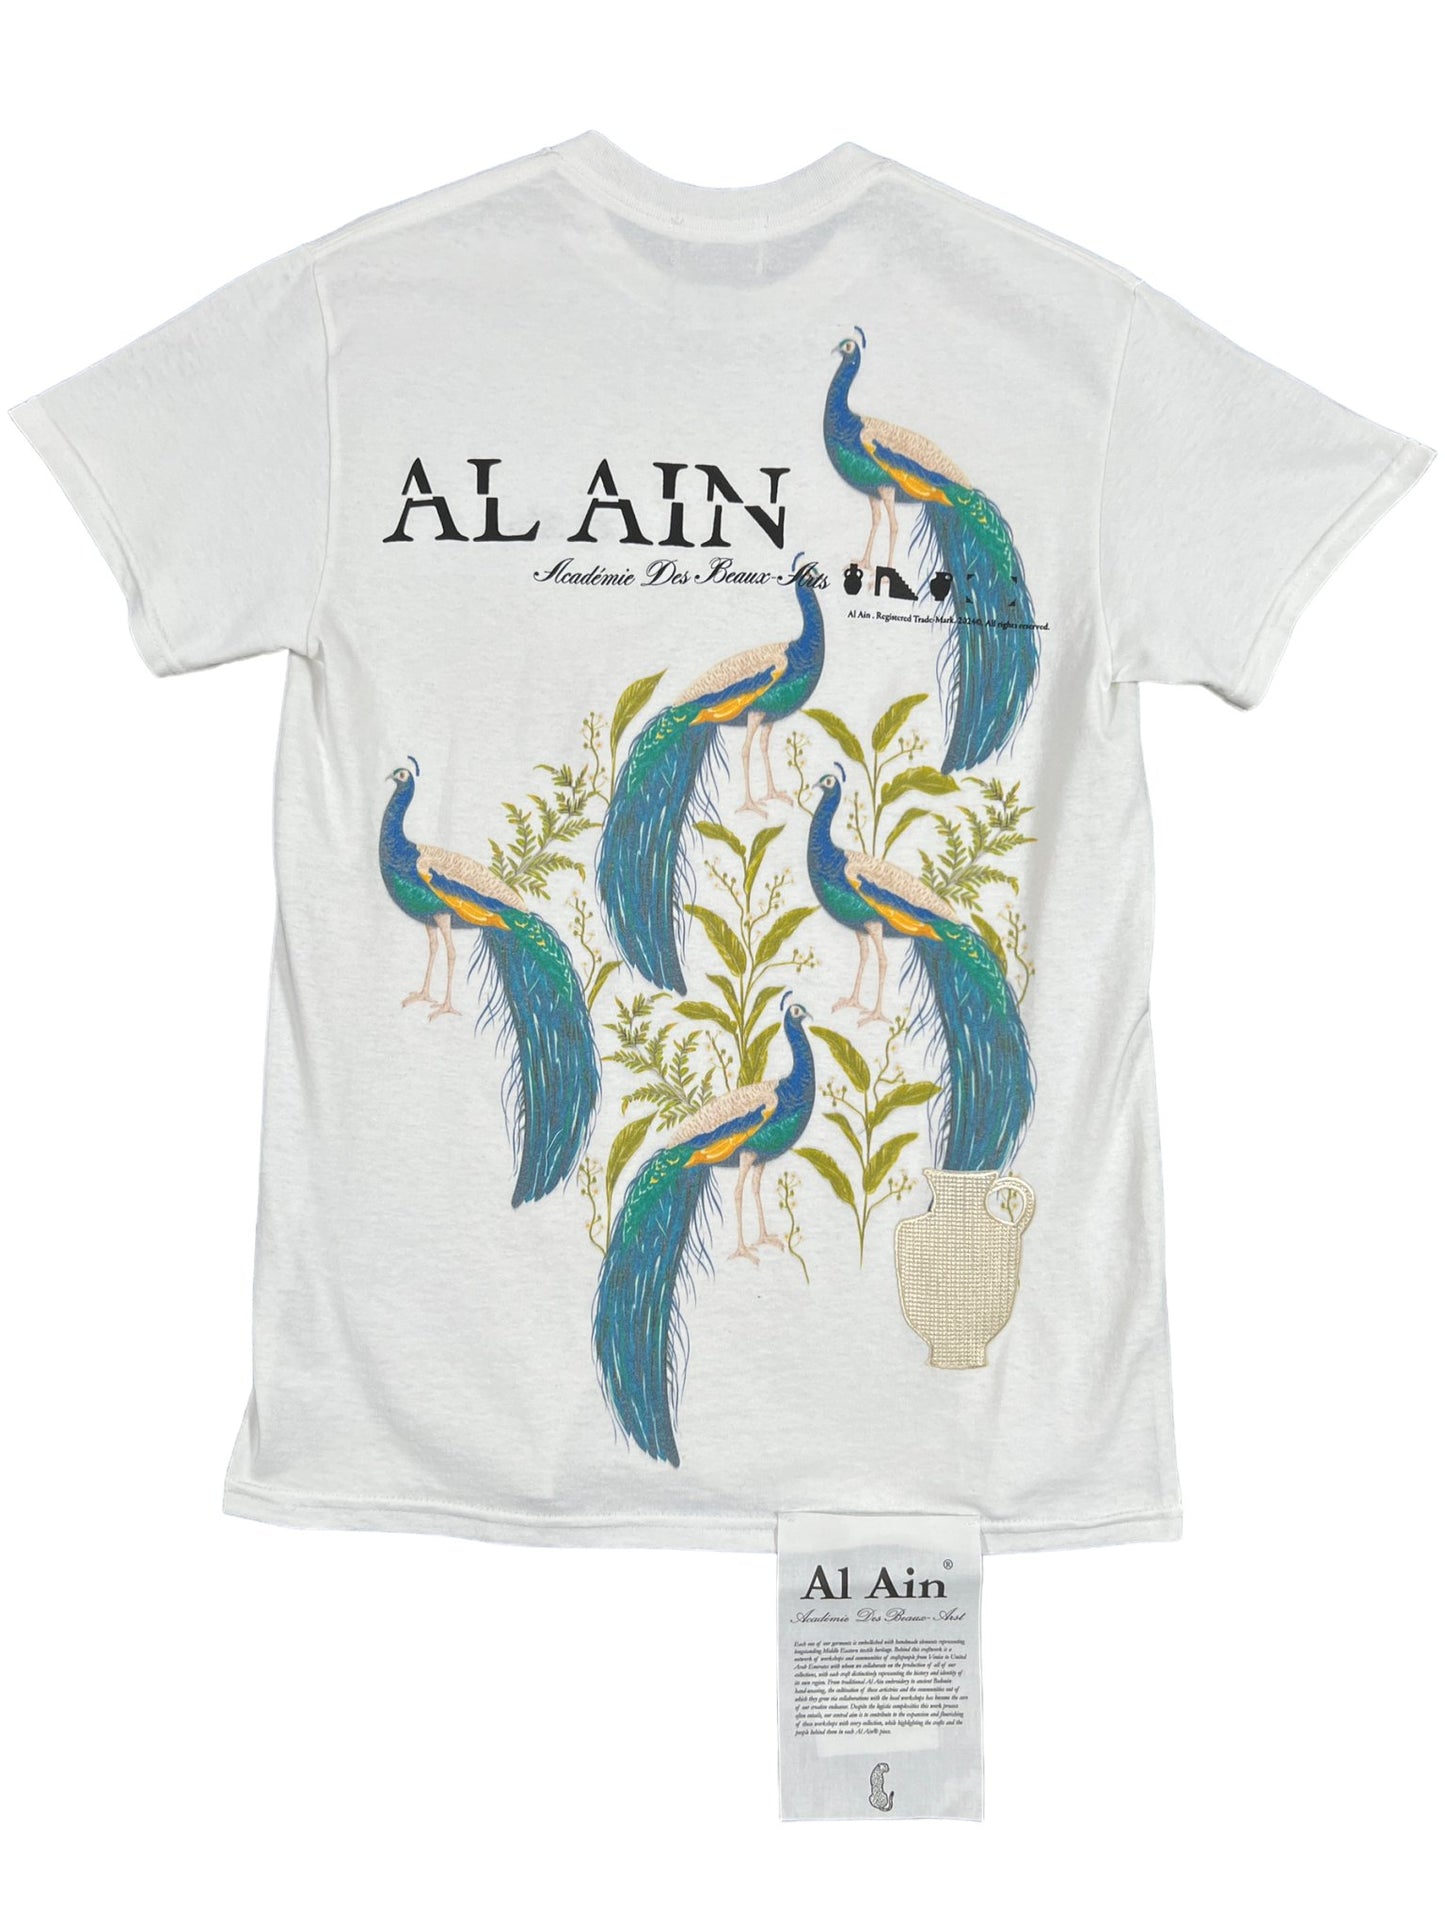 AL AIN AMHX S121 PEACOCK BLANC by AL AIN featuring "AL AIN" and six peacocks in a large graphic detail on the back. There is also a small embroidered brand name label sewn at the bottom front.